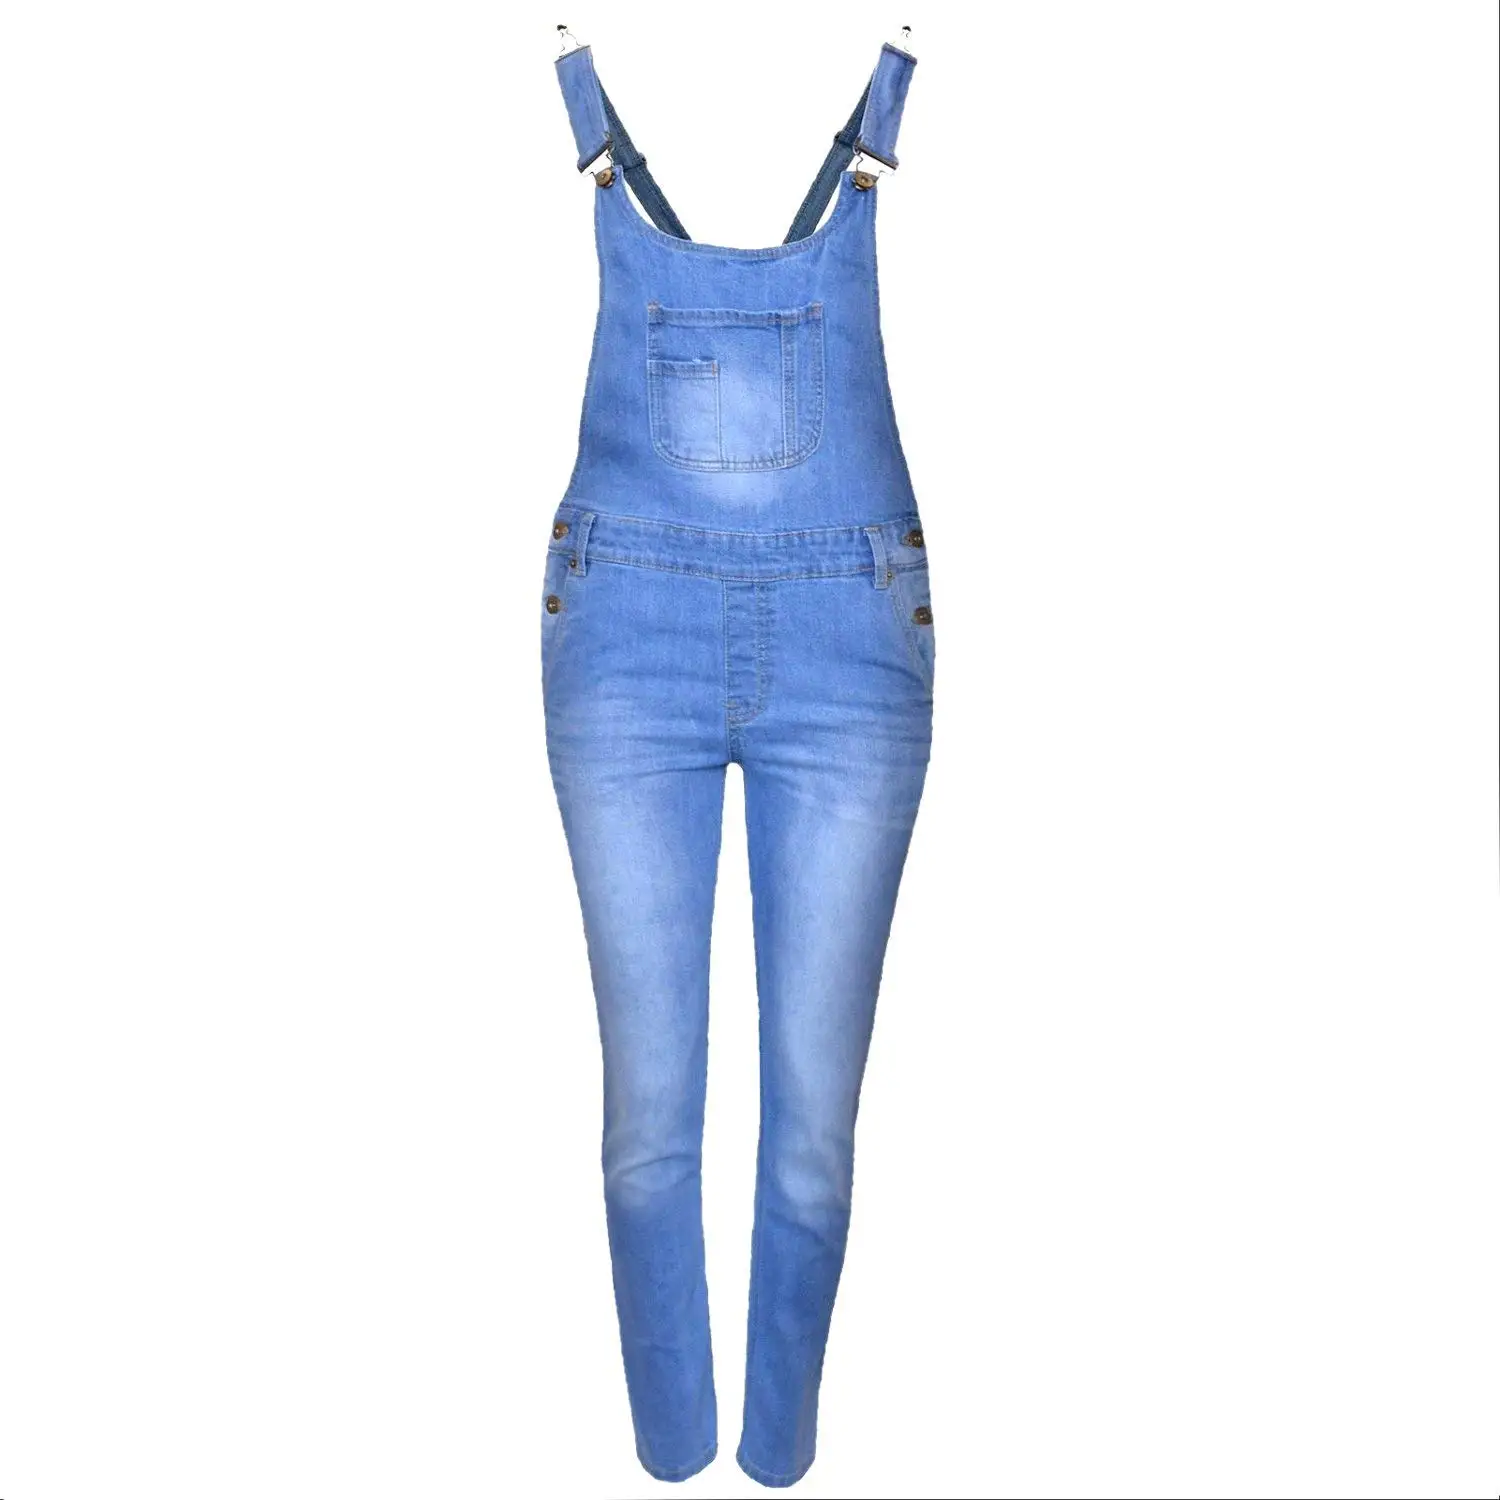 jeans price for girls